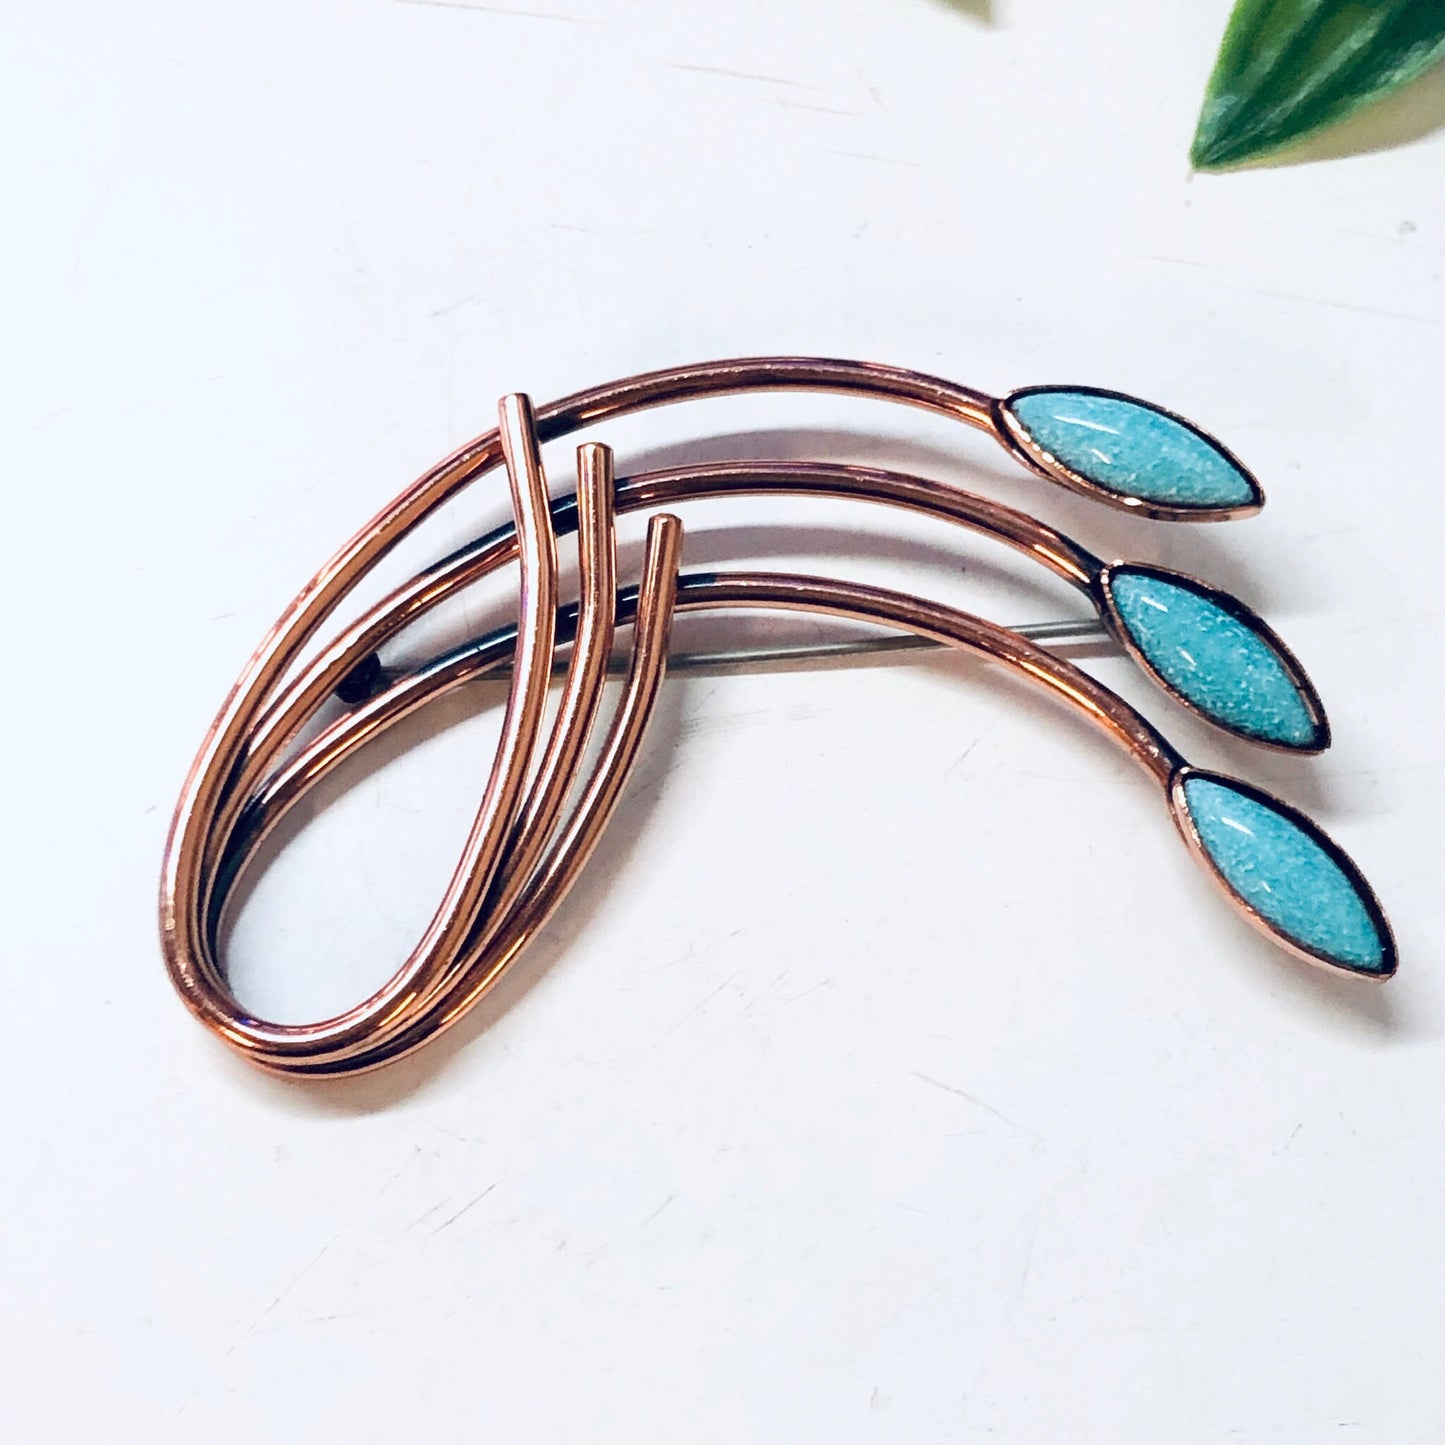 Vintage copper brooch with blue turquoise stones in a unique curved design, reminiscent of Matisse or Renoir style costume jewelry.